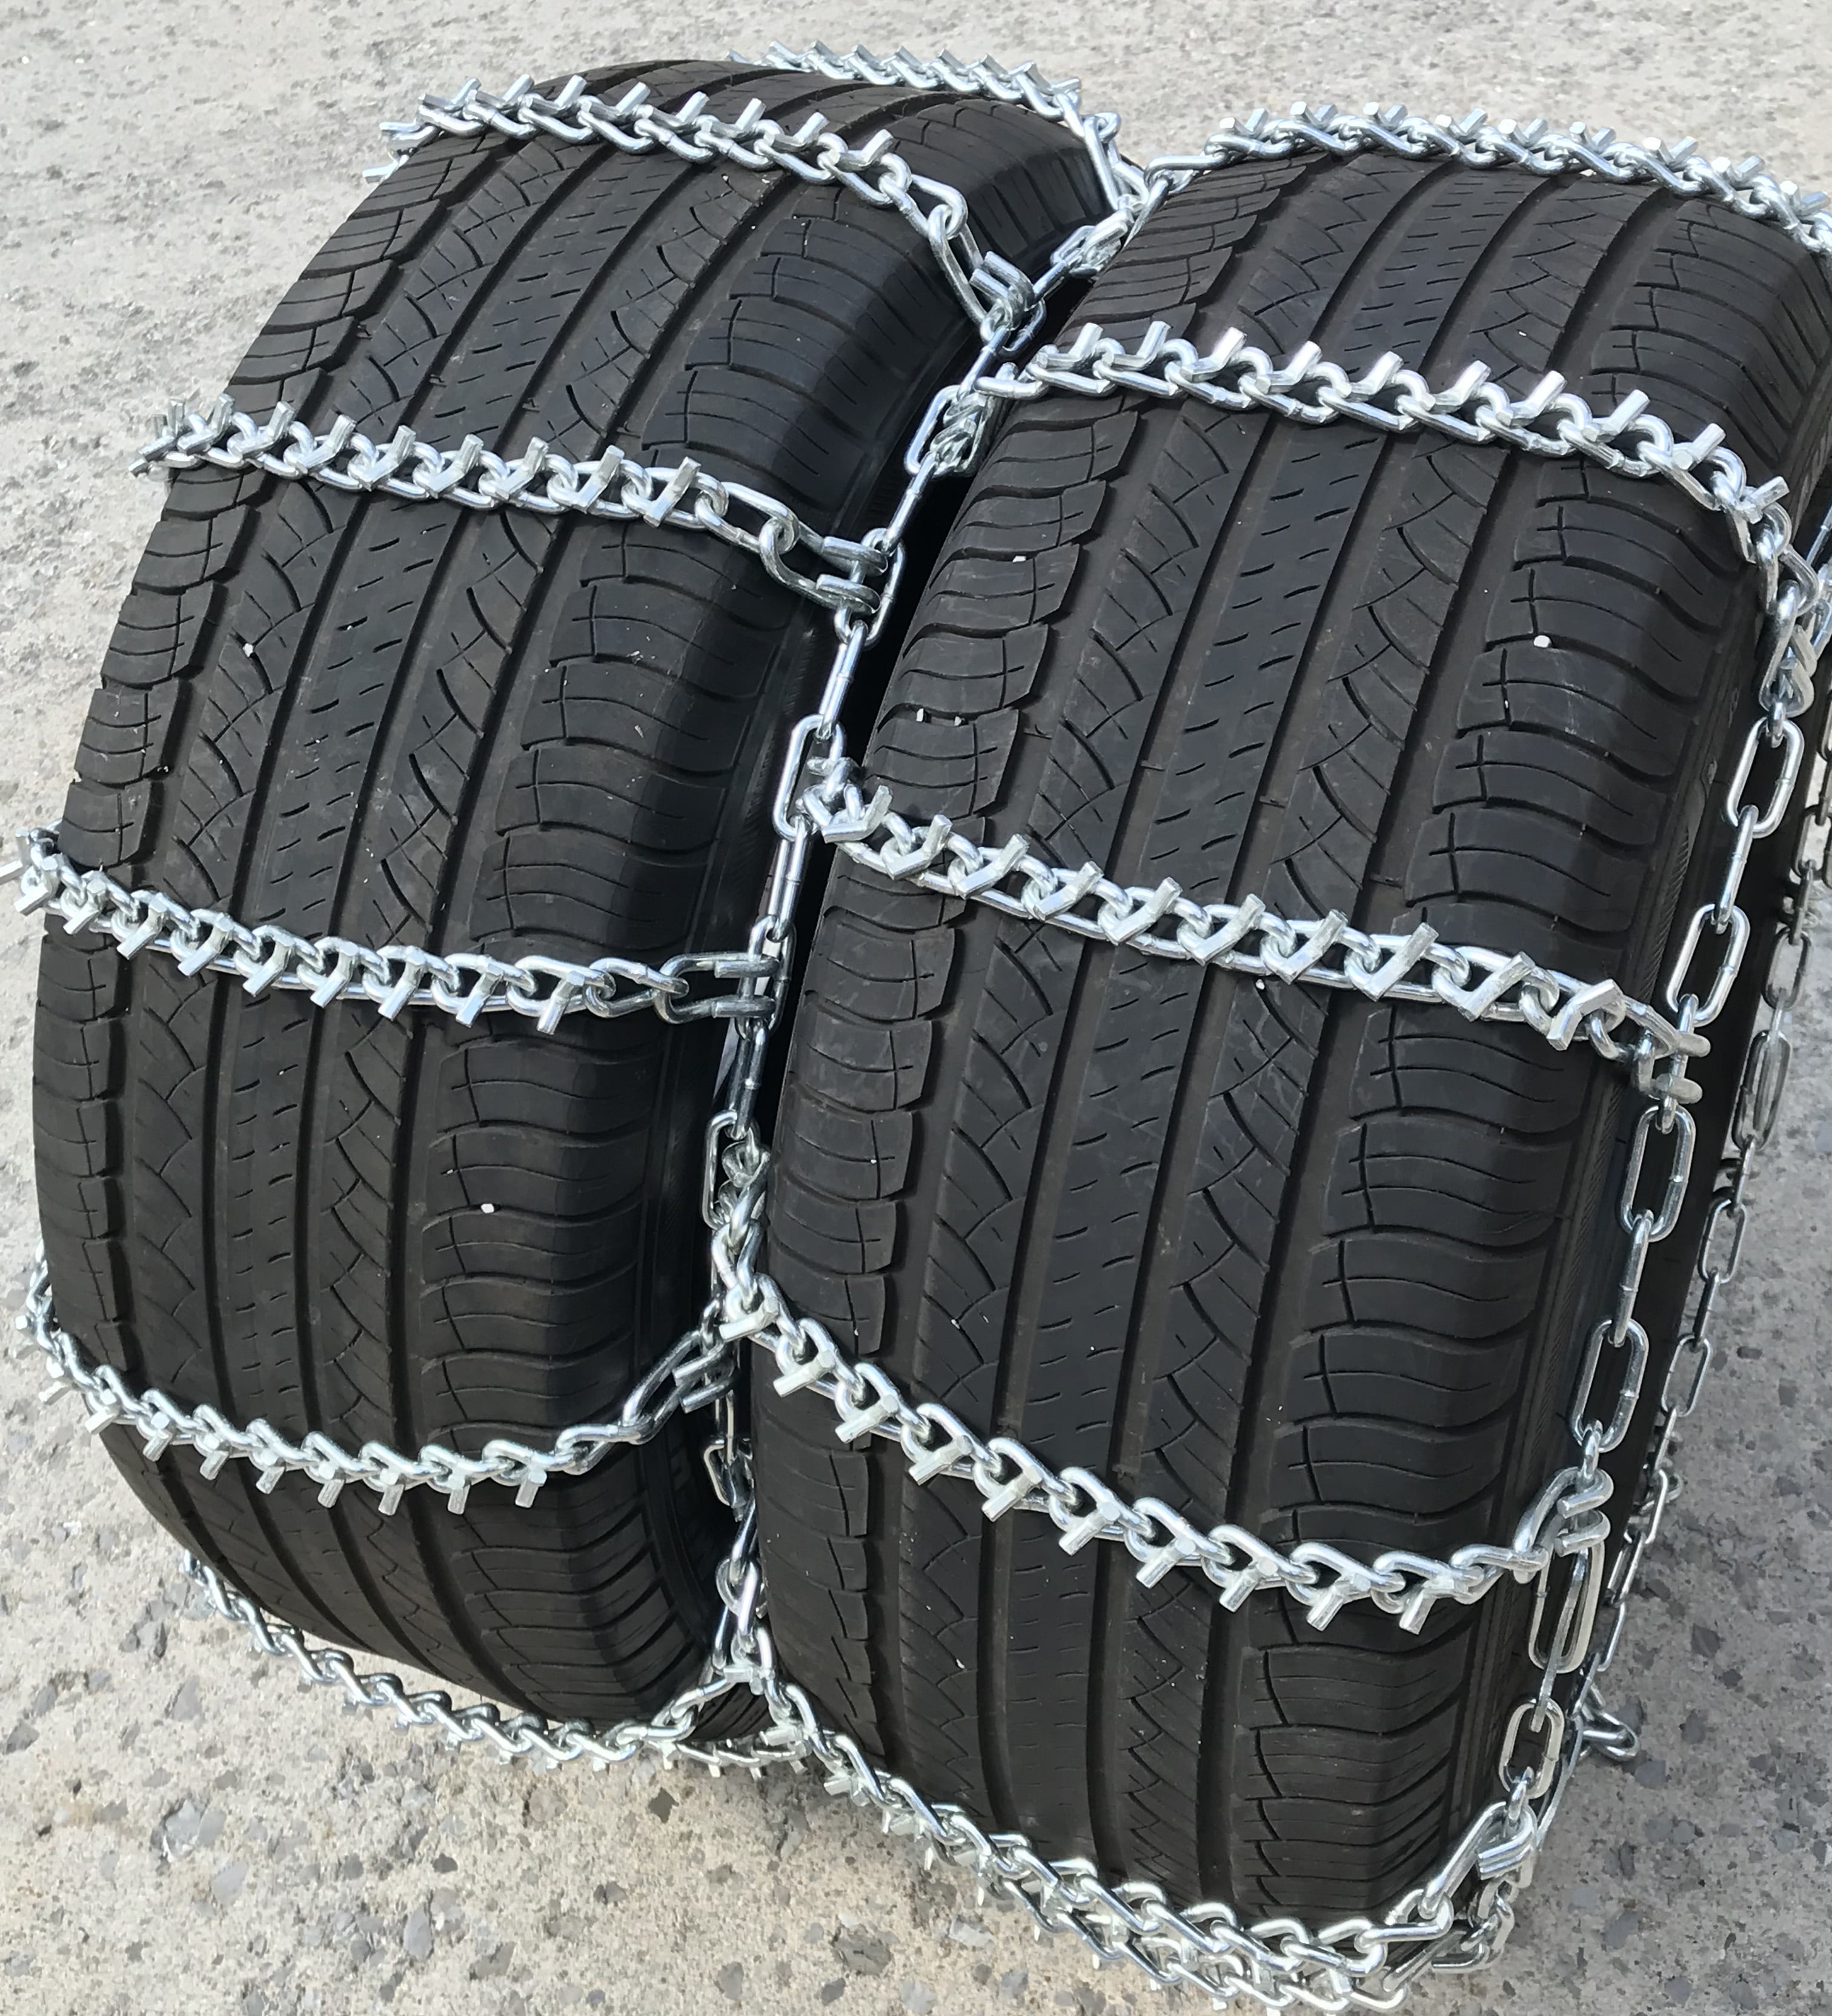 TIRES with Arrow 6"x24" RIDER SIGNS Buy 1 Get 1 FREE 2 Sided Plastic 